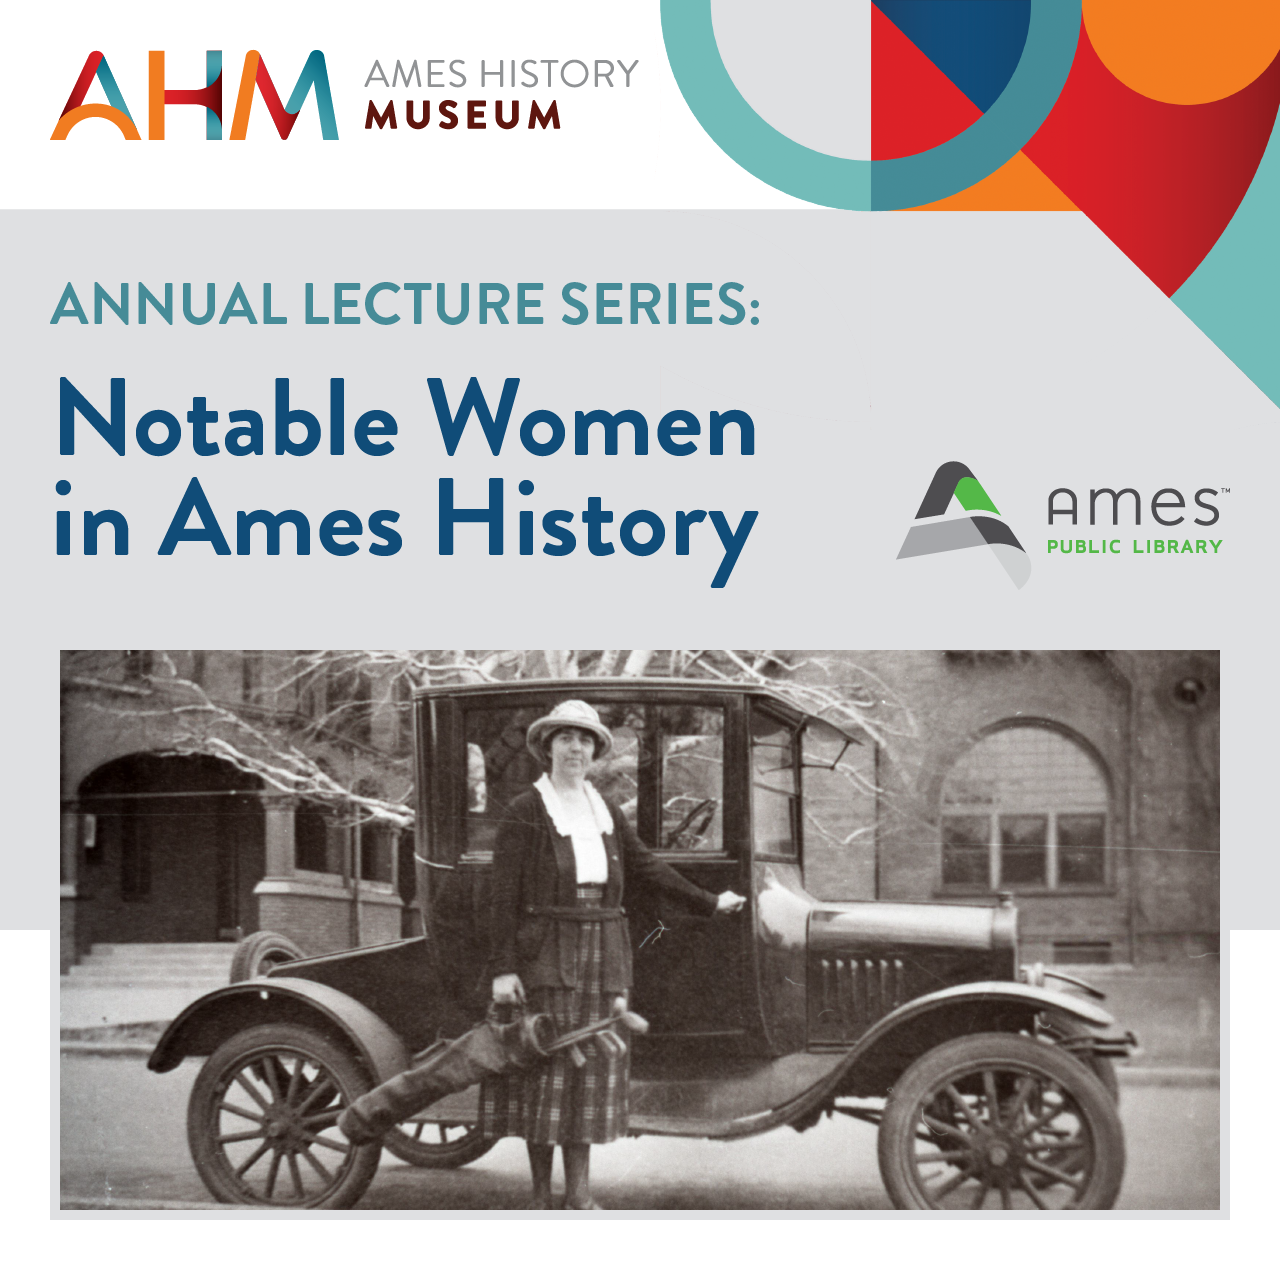 Ames History Museum Annual Lecture Series: Notable Women in Ames History